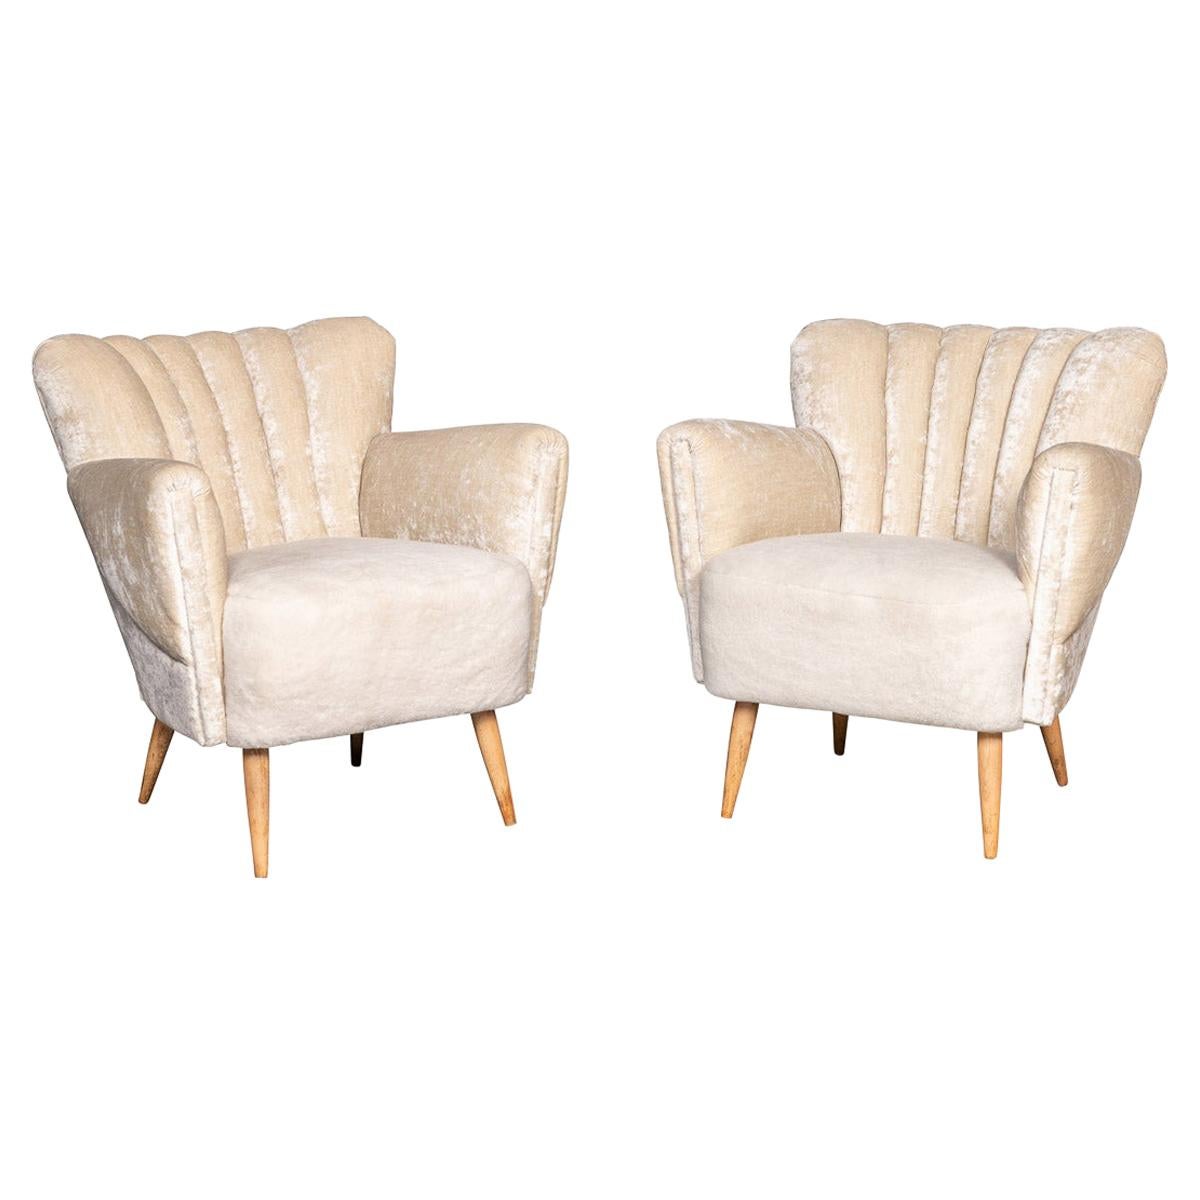 20th Century Pair of Boudoir Shell-Back Chairs, c.1950 For Sale